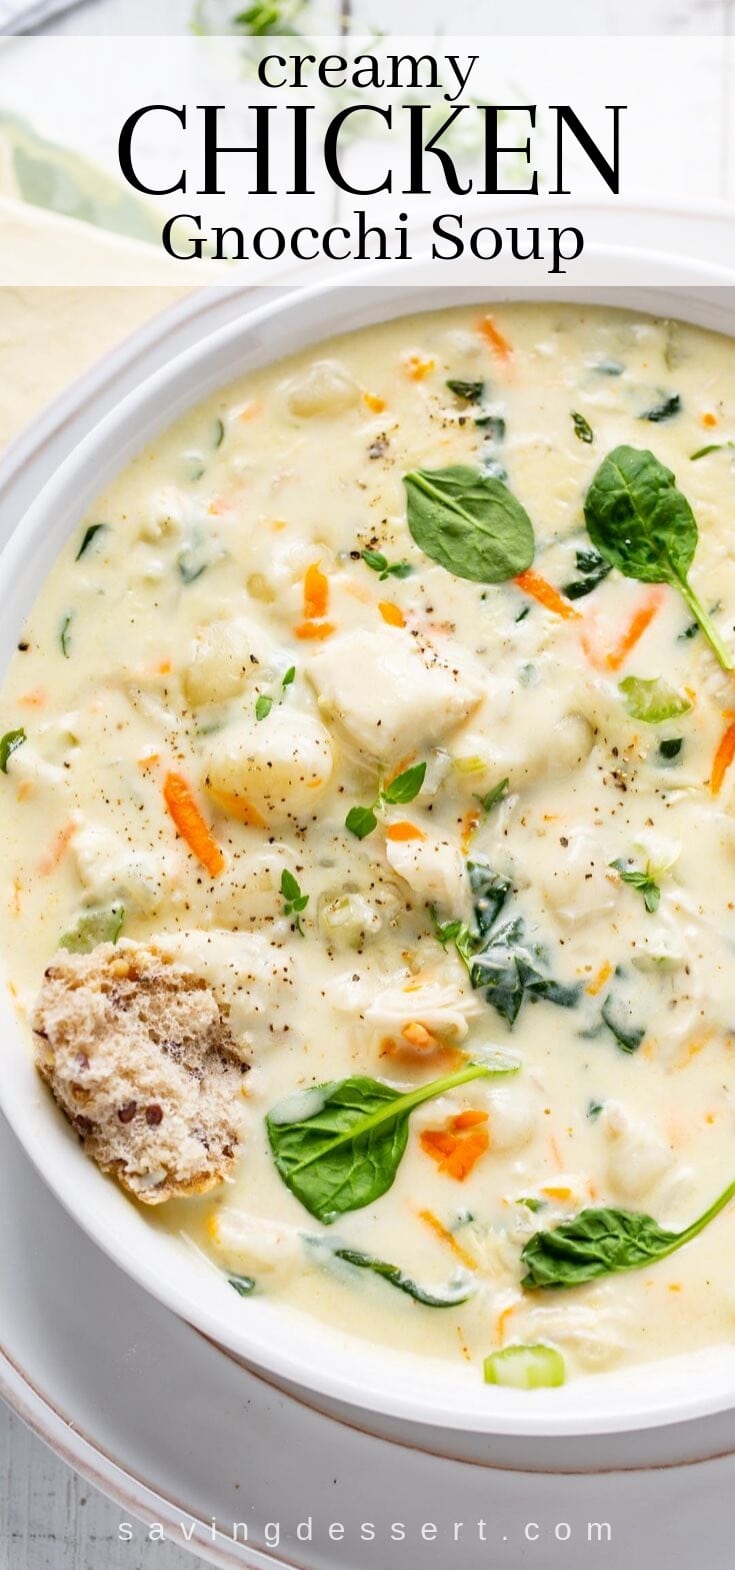 A bowl of creamy chicken gnocchi soup with spinach leaves